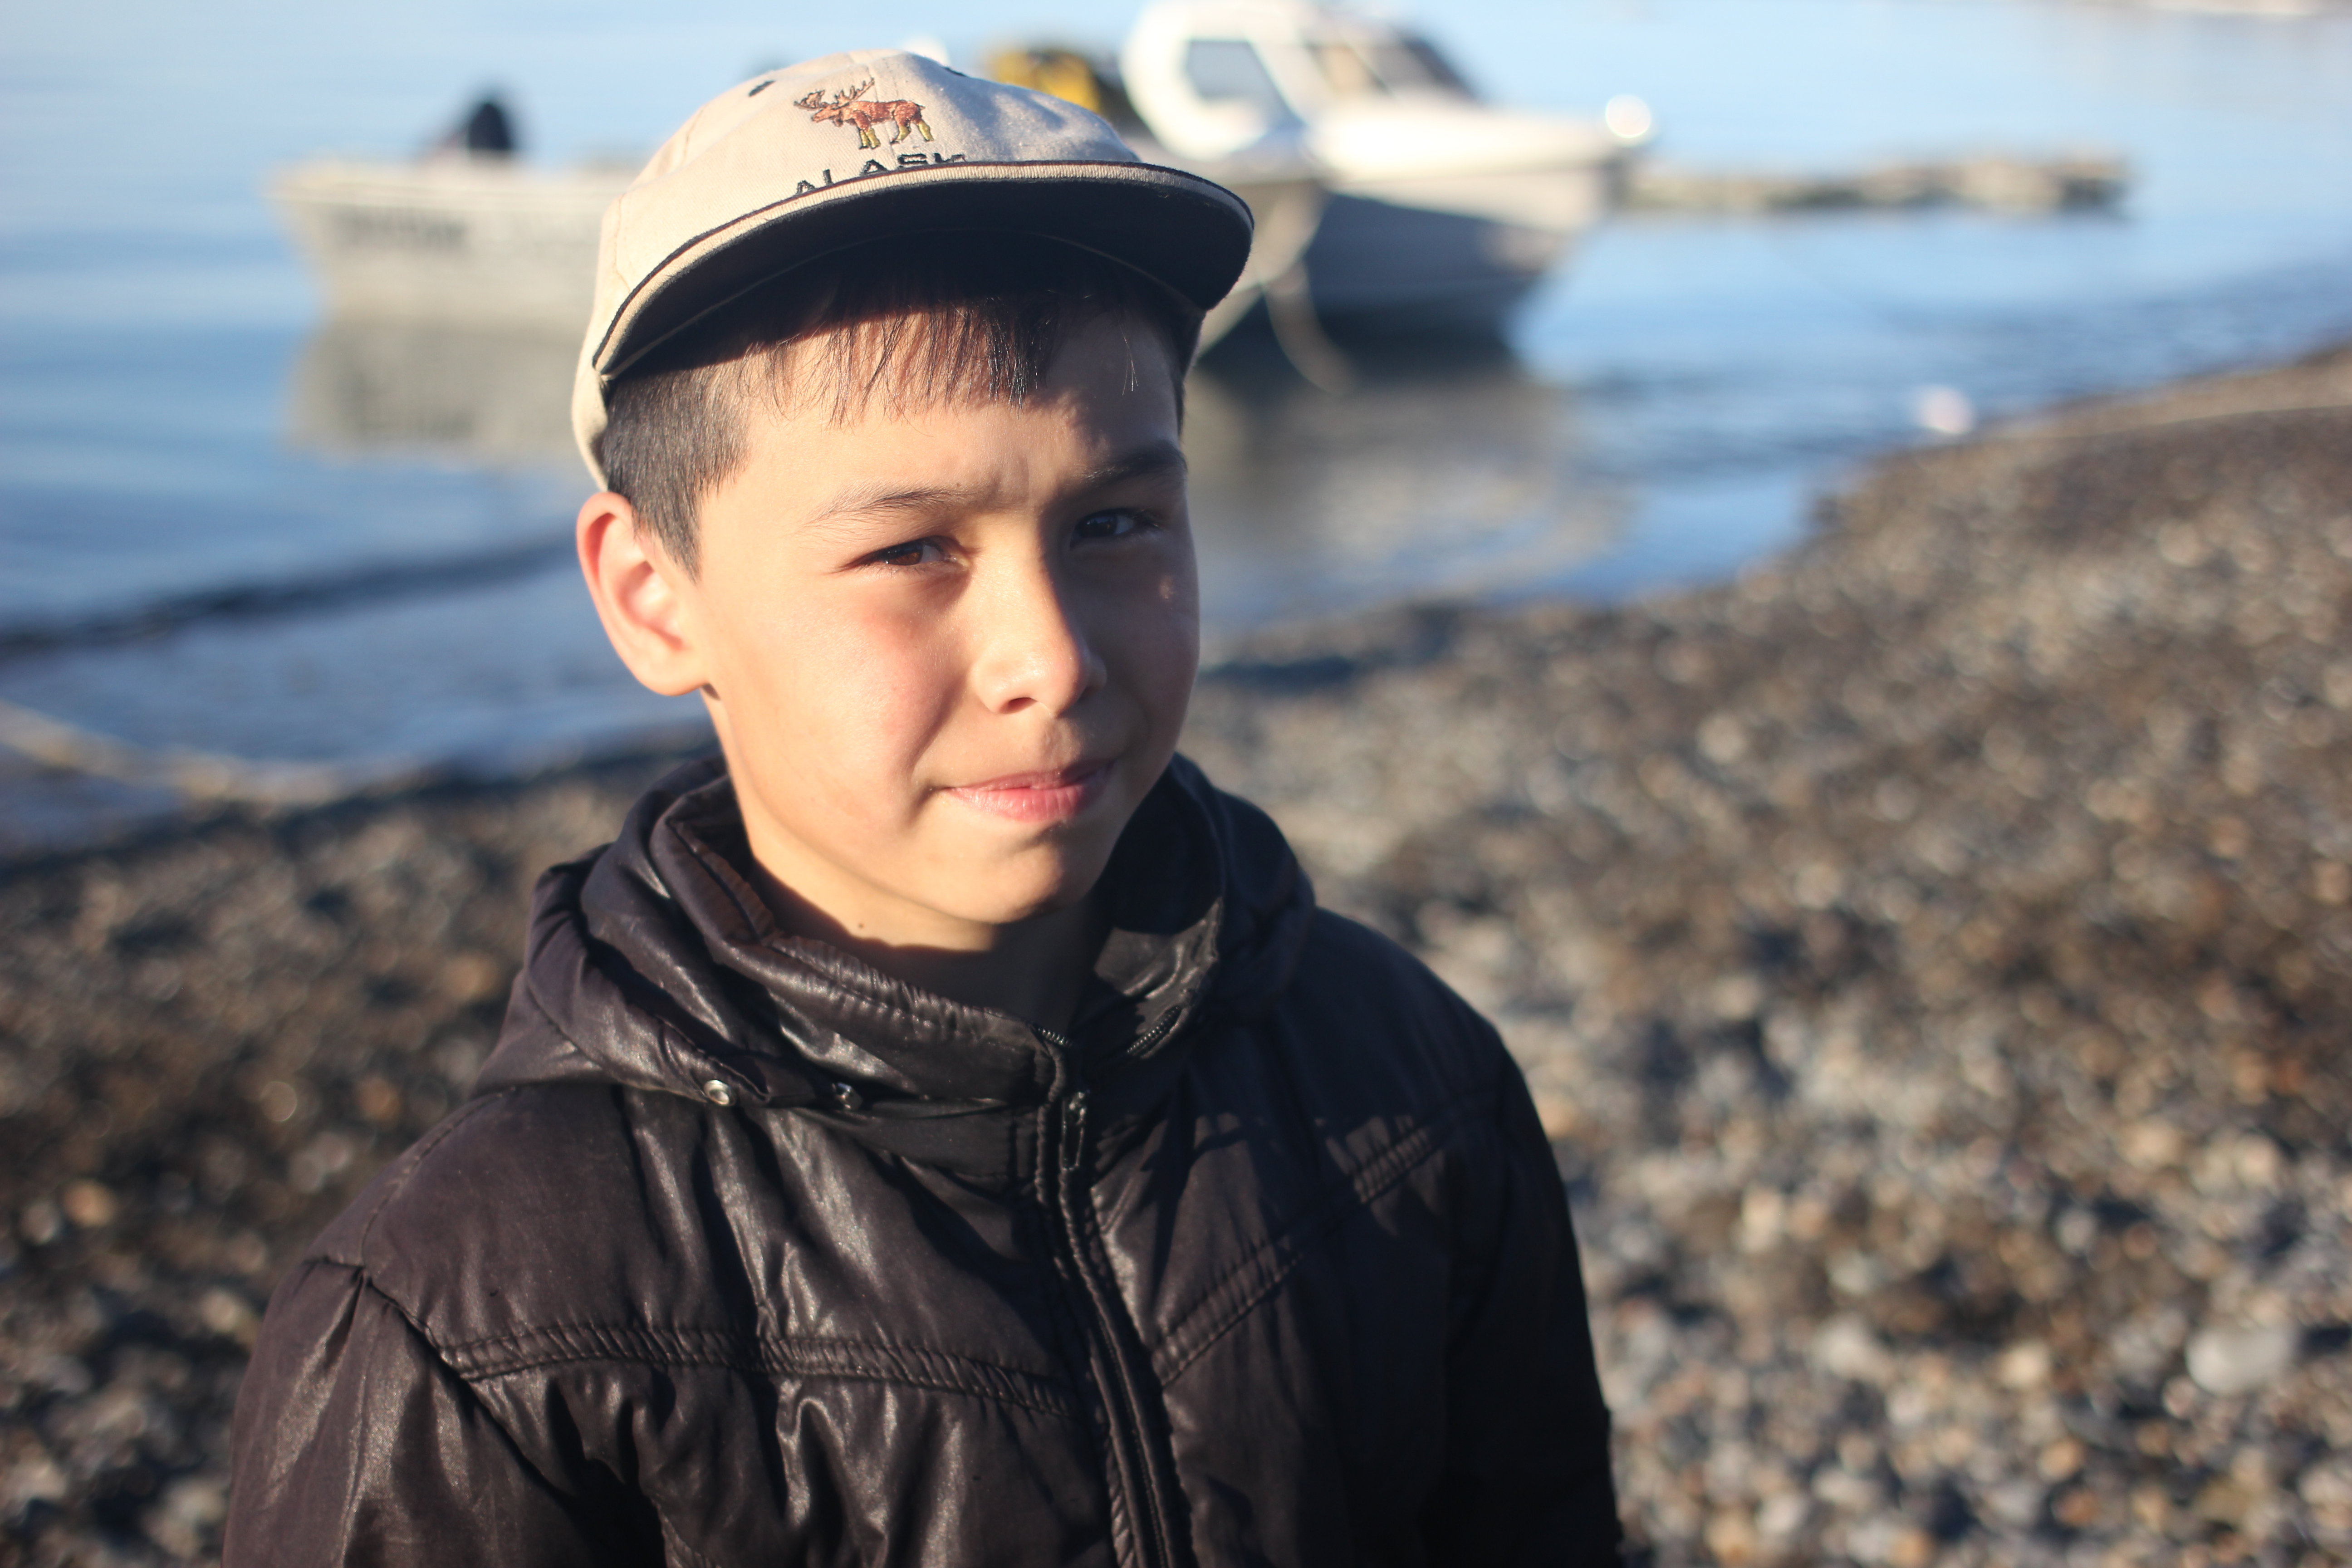 A young member of local dance group wears a cap from Alaska on the beach at Uelen, Chukotka, July 2016. This far north, international travel is rare, but Uelen’s dance group has flown to Alaska to perform. (Kirsten Swann / Alaska Dispatch News)